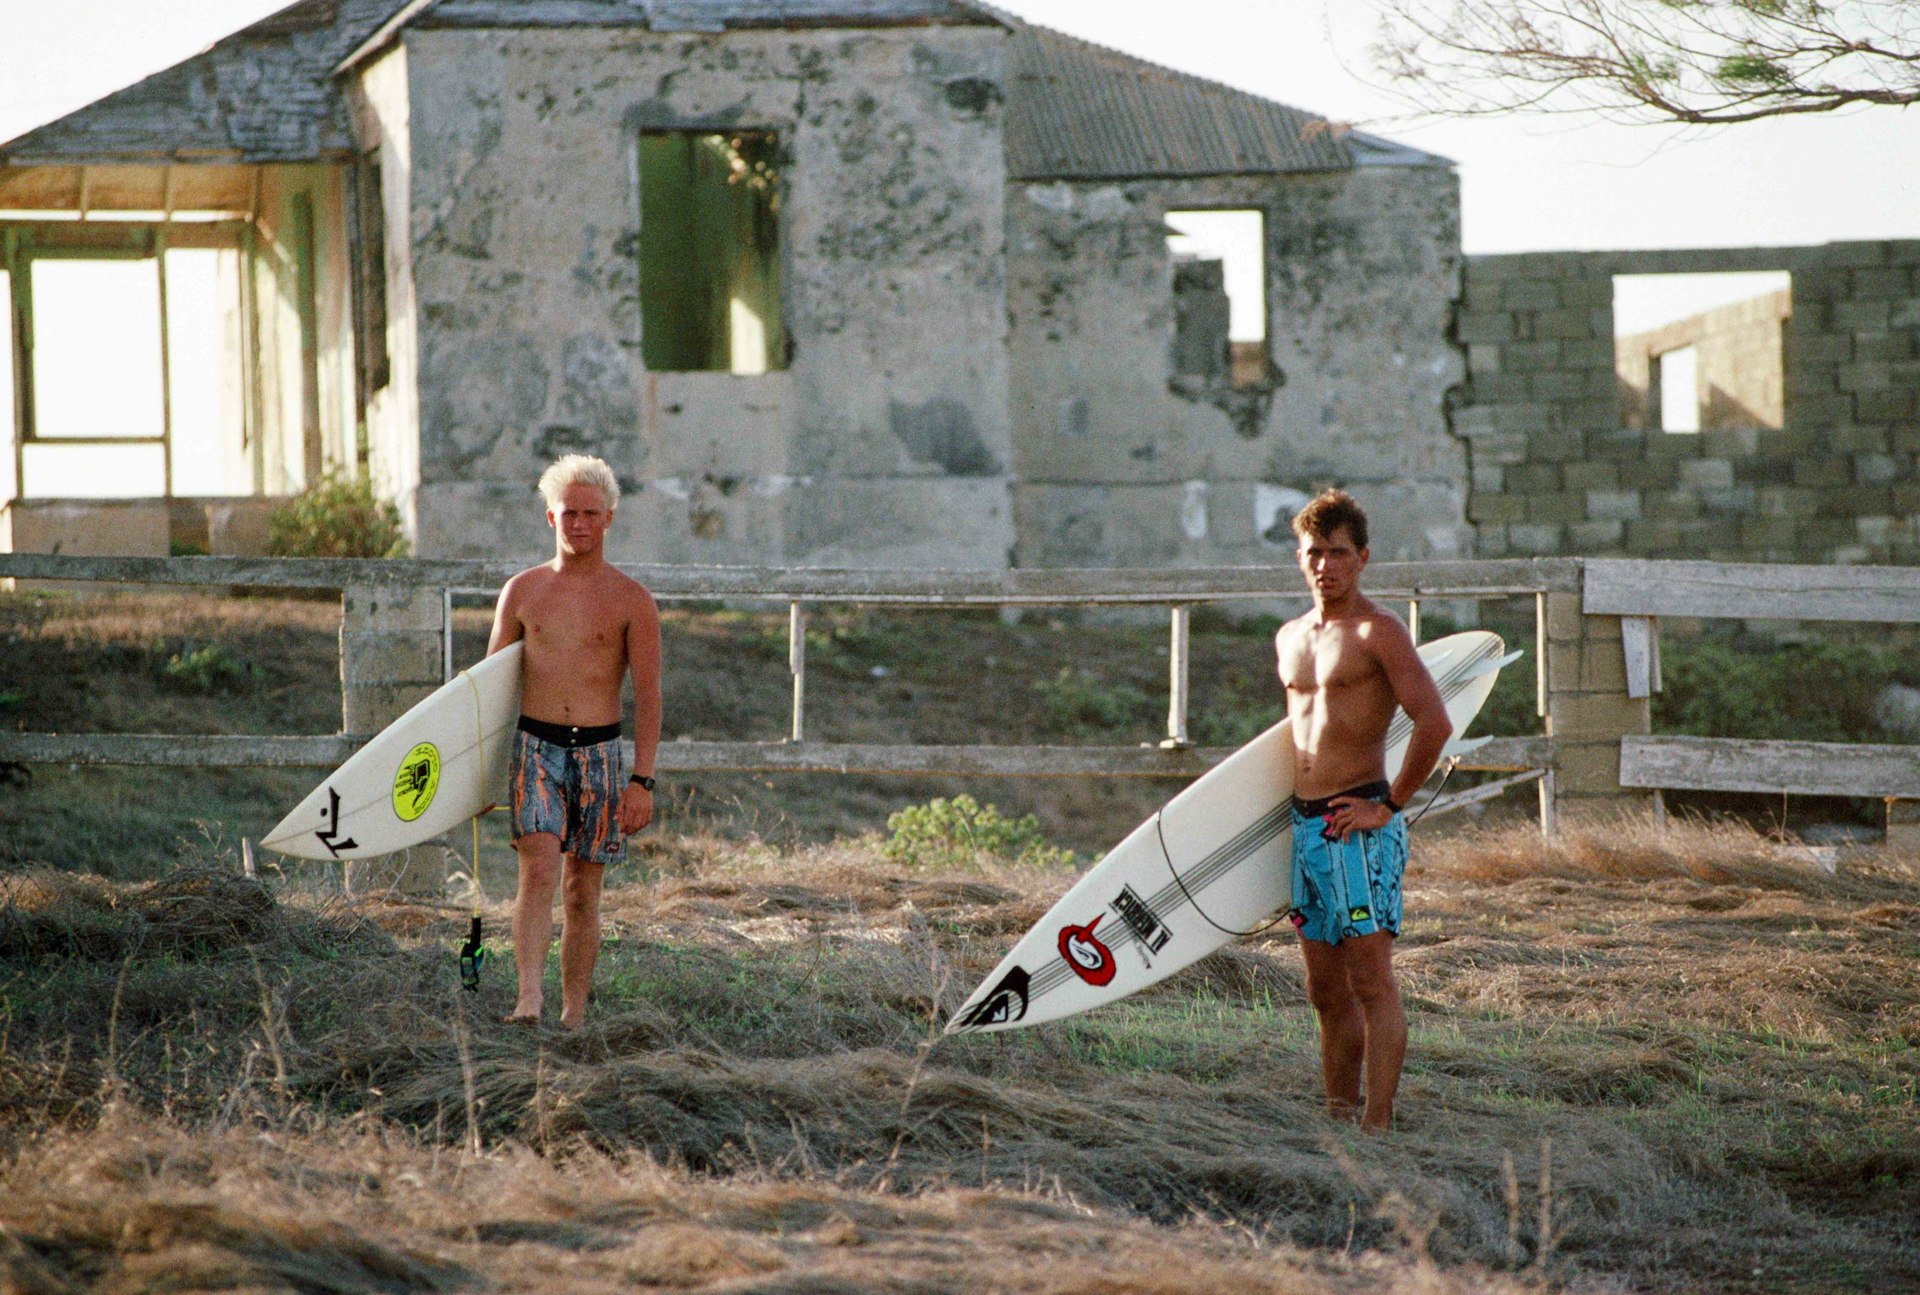 How the Momentum Generation redefined modern surf culture